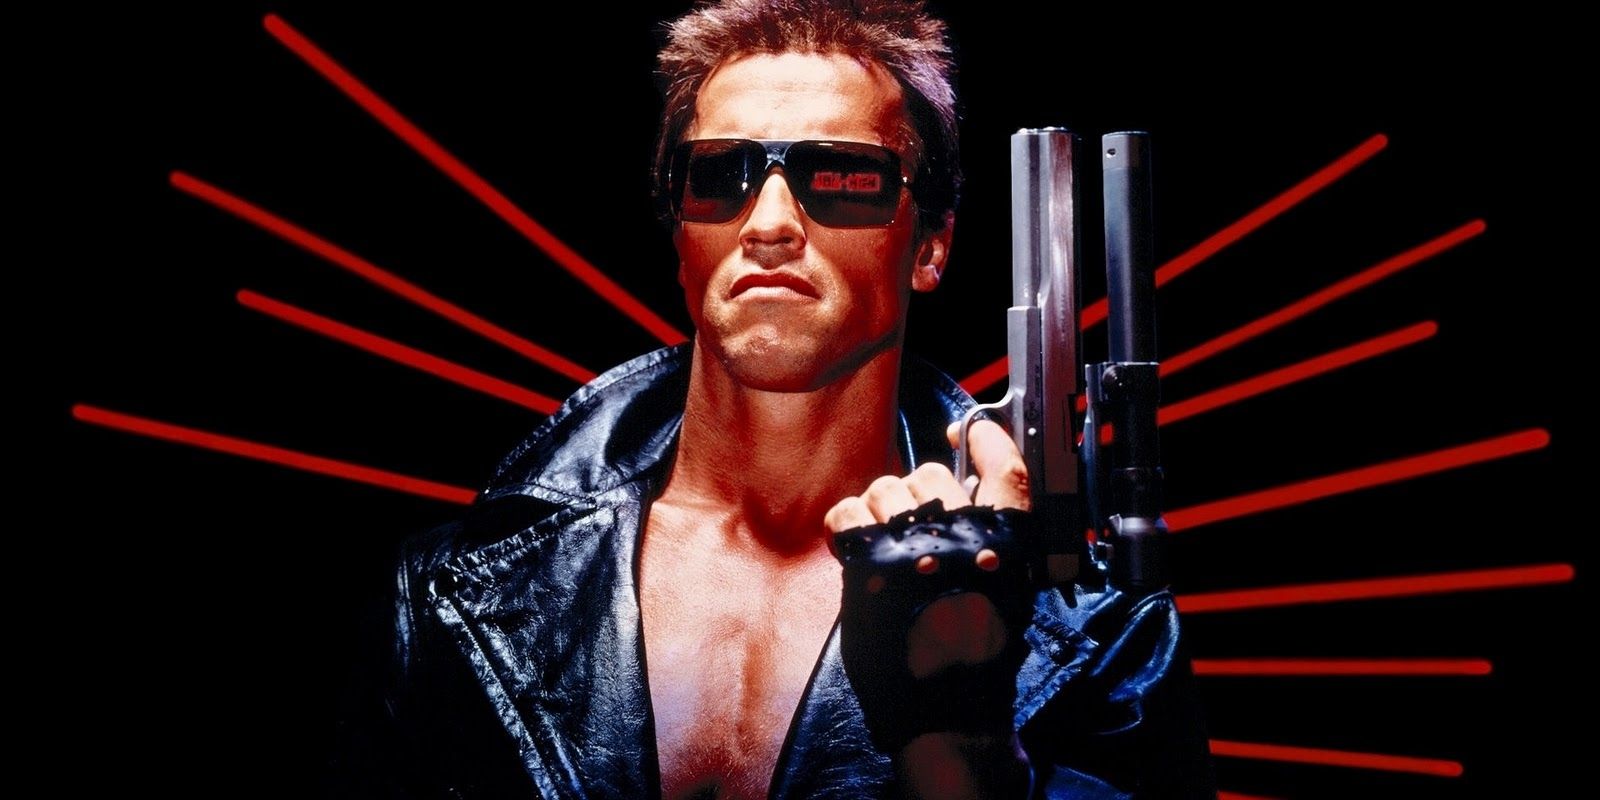 Terminator played by Arnold